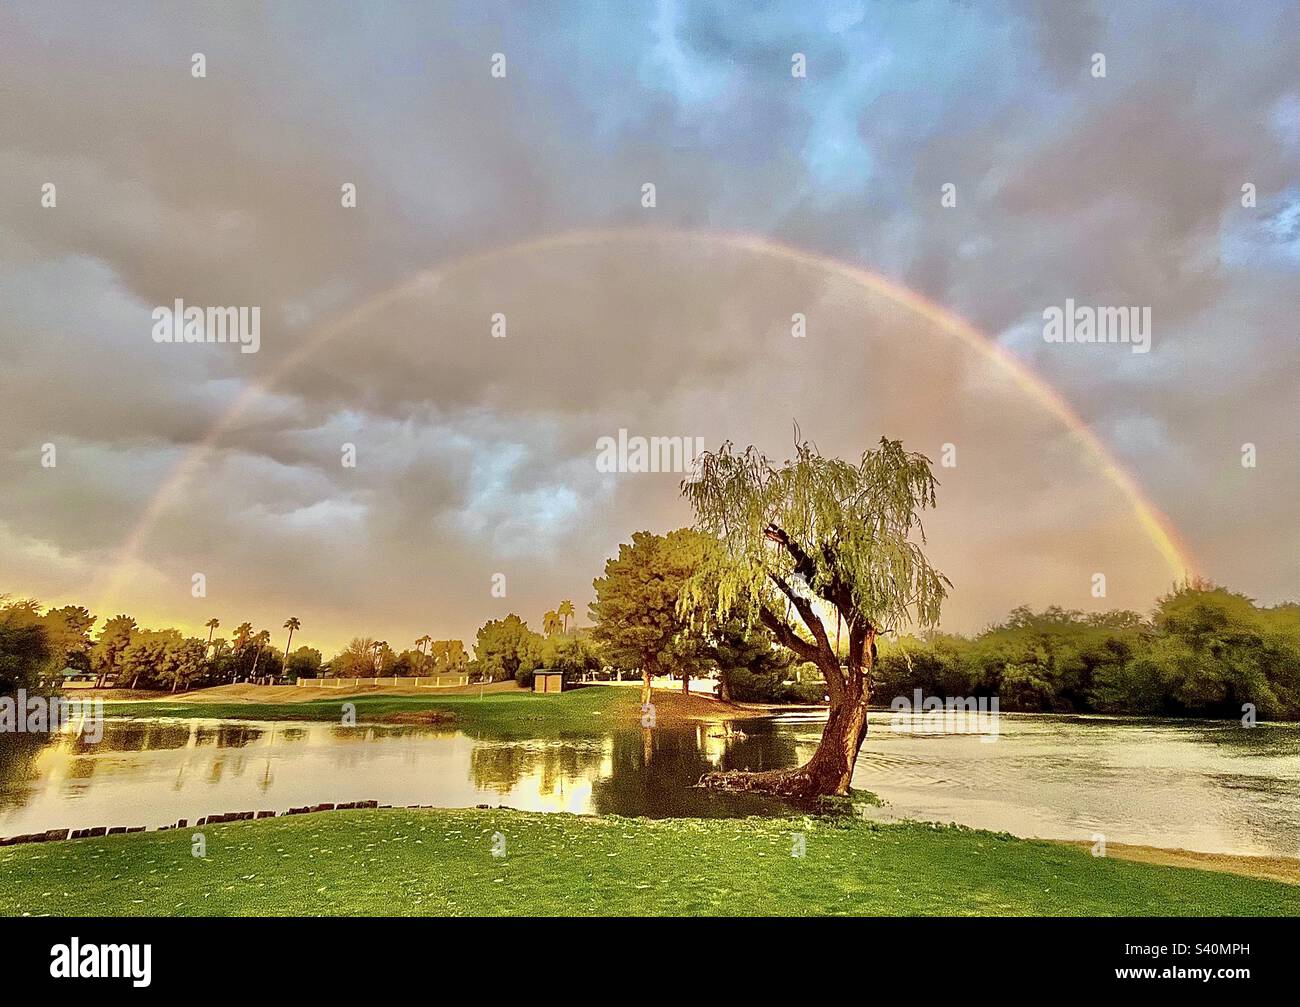 Full rainbow, arching over willow tree, stormy blue sky, vibrant green, golden sunset hues, reflections in pond. Rainbow appears to be gathering and focusing storm clouds. Stock Photo